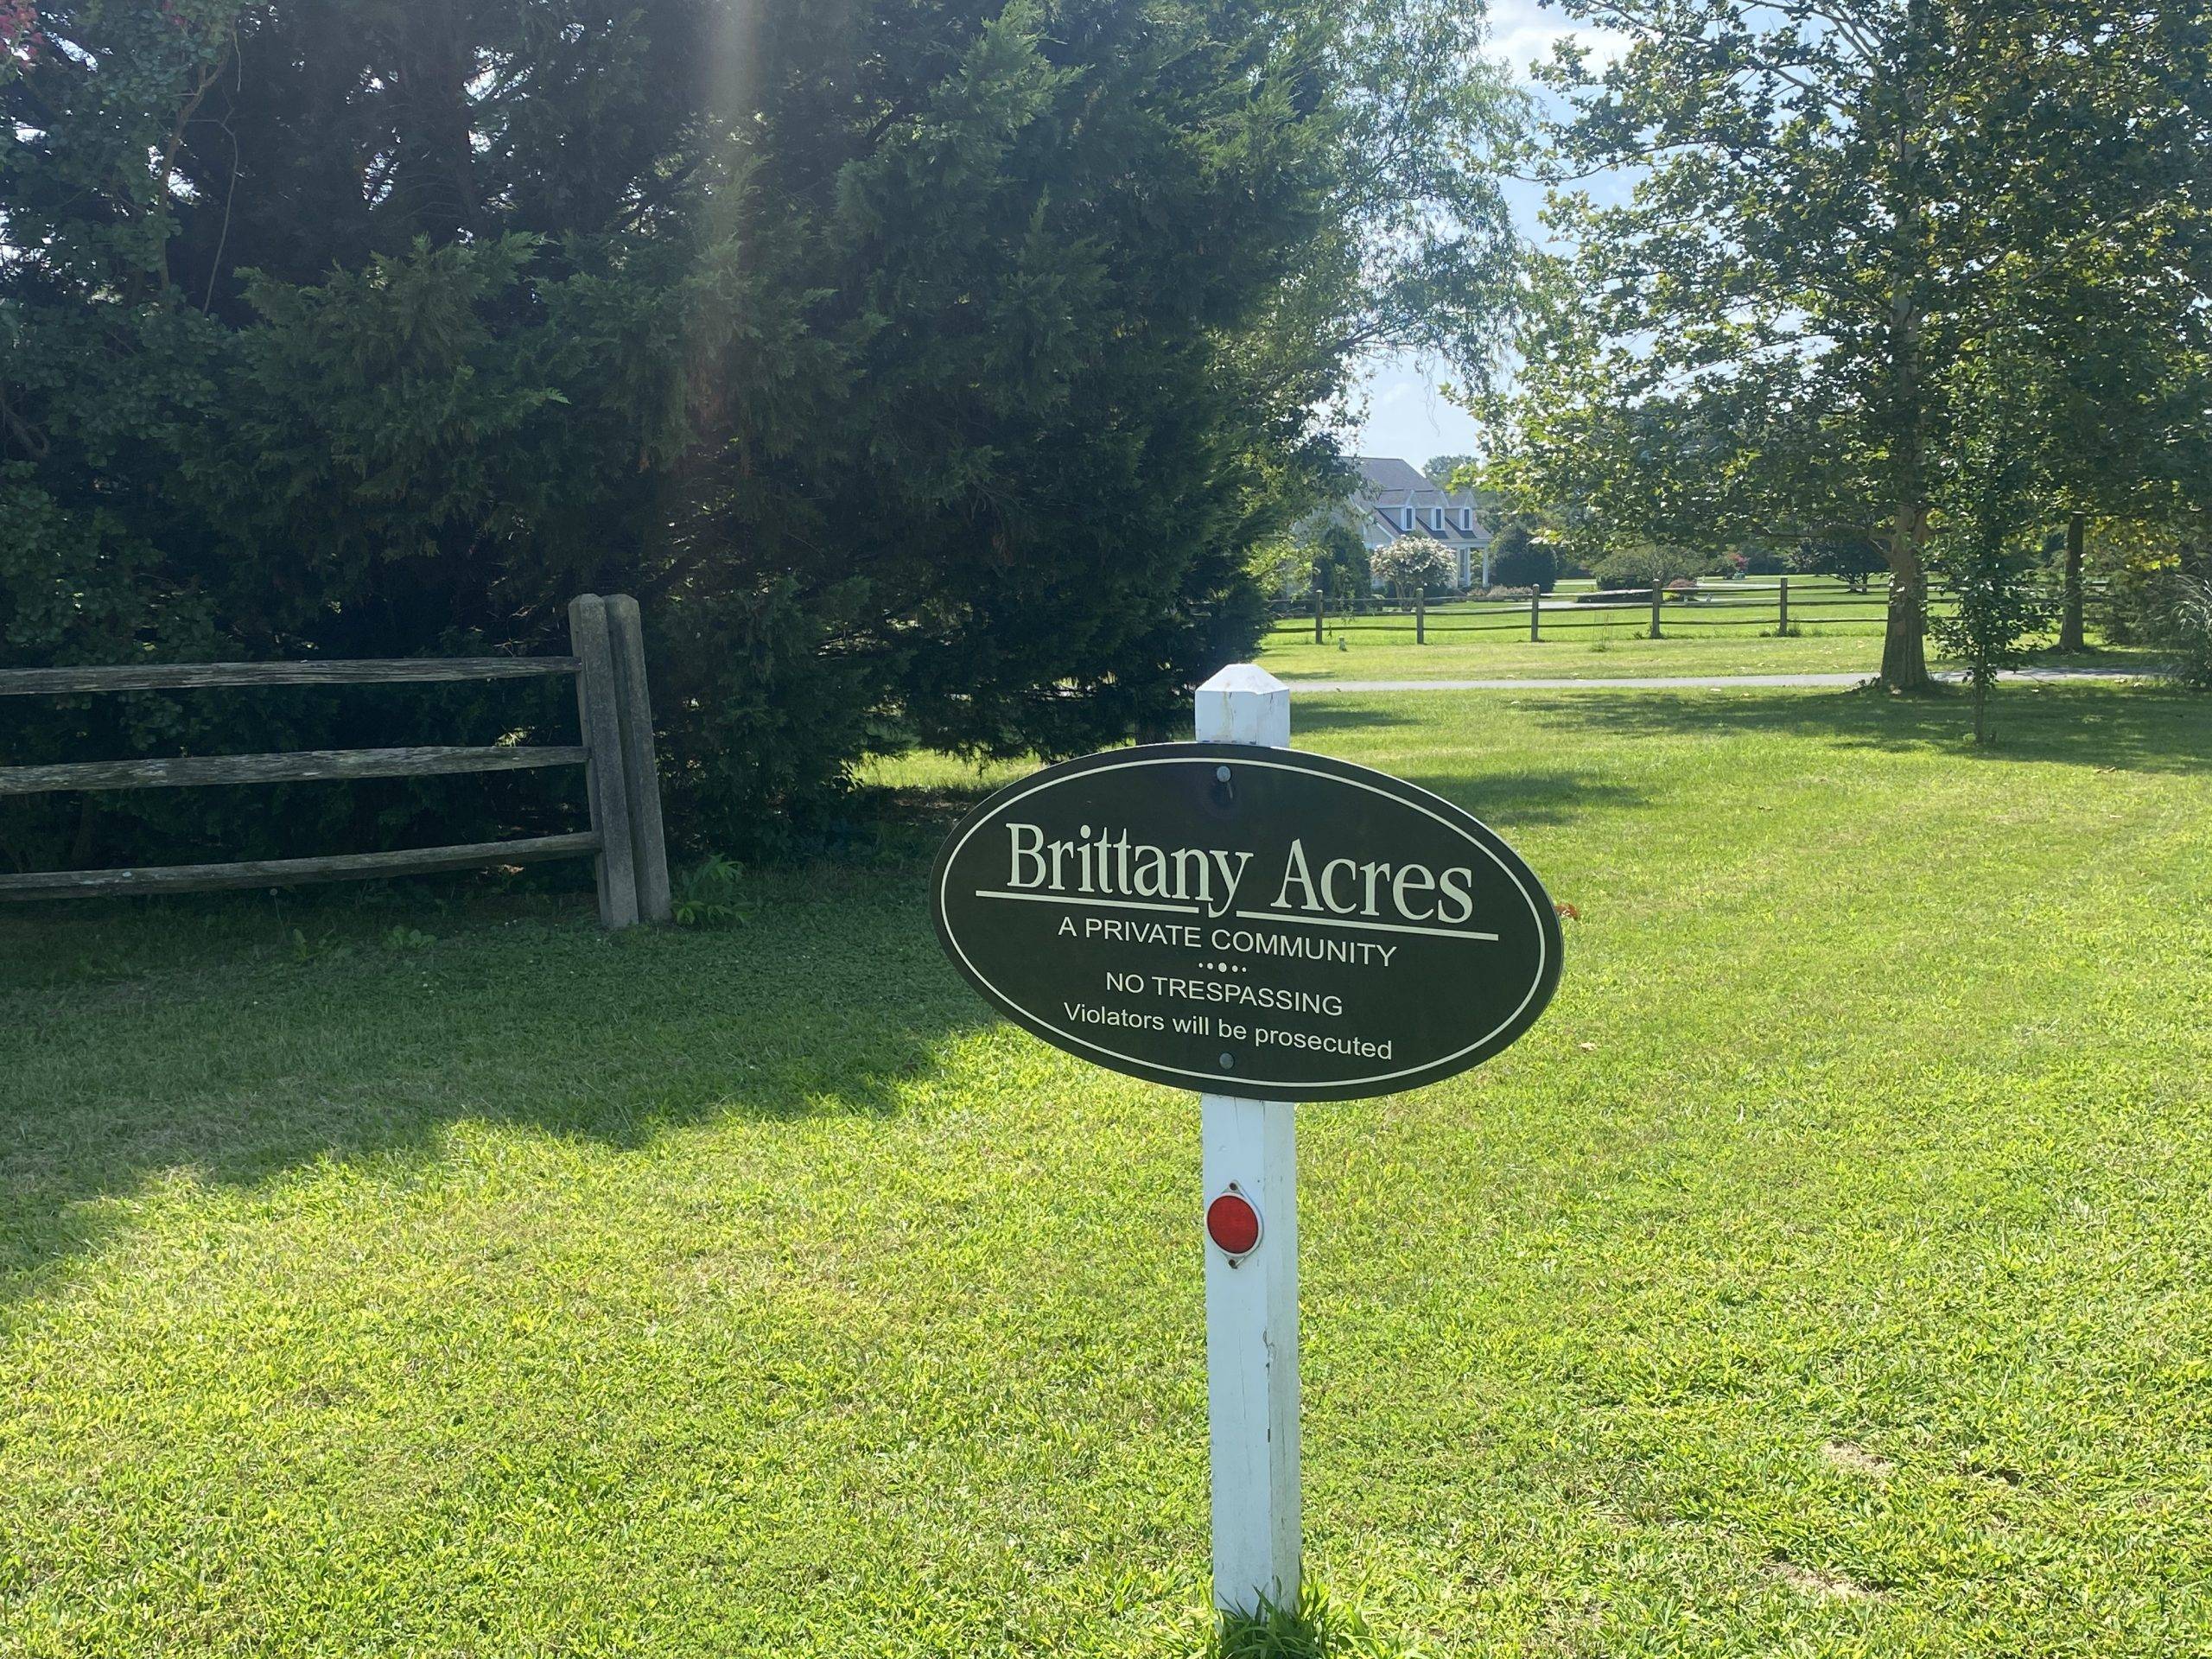 Brittany Acres